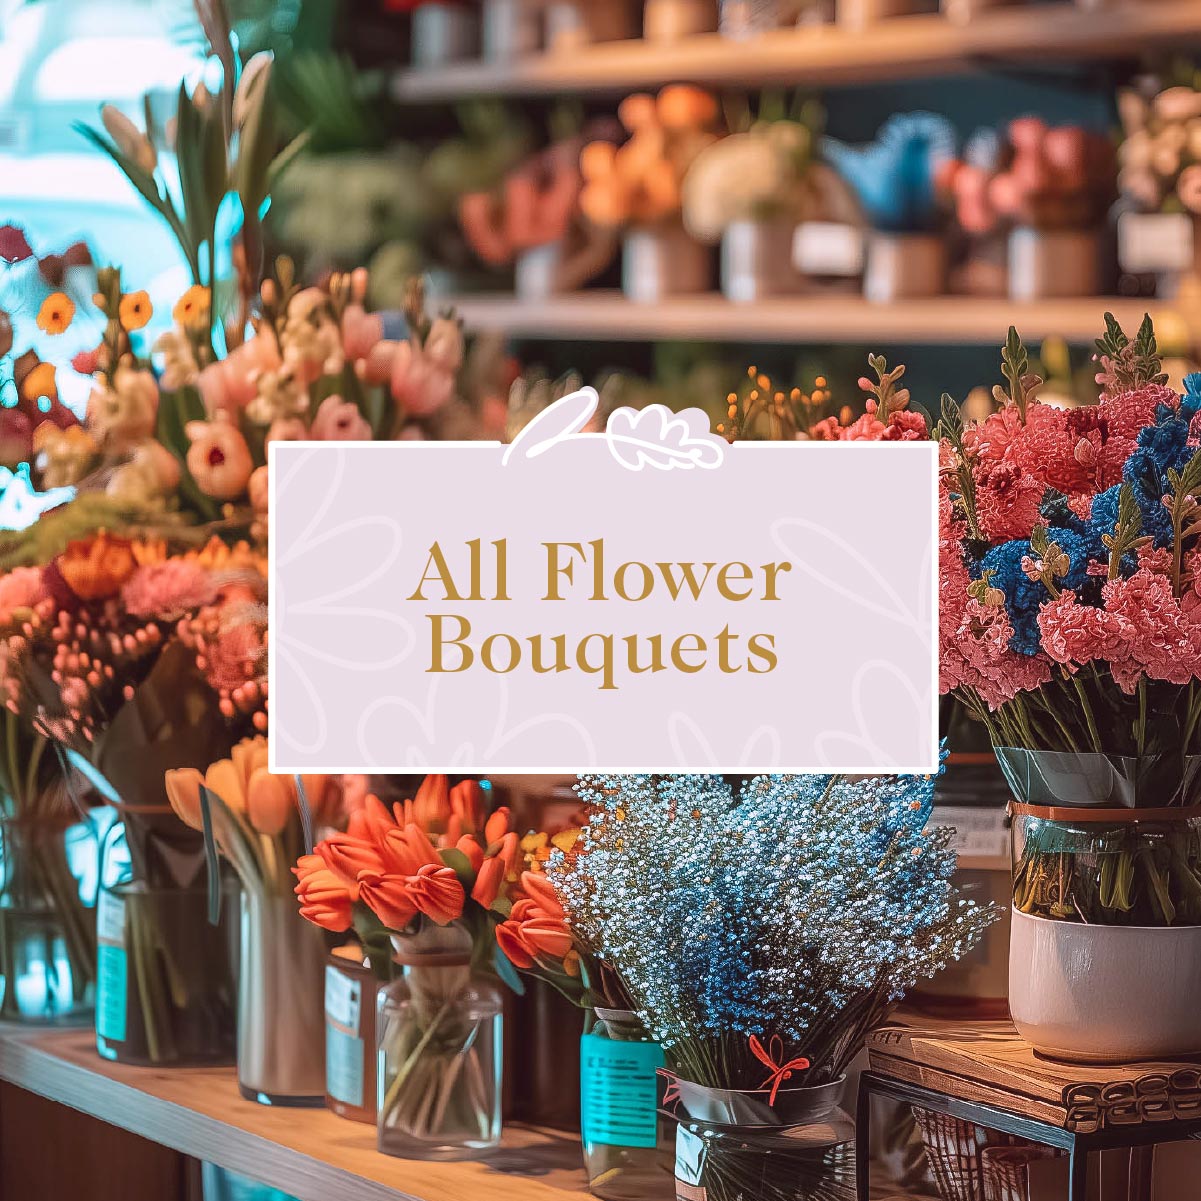 A vibrant selection of various flower bouquets on display in a cozy flower shop, available at Fabulous Flowers and Gifts.